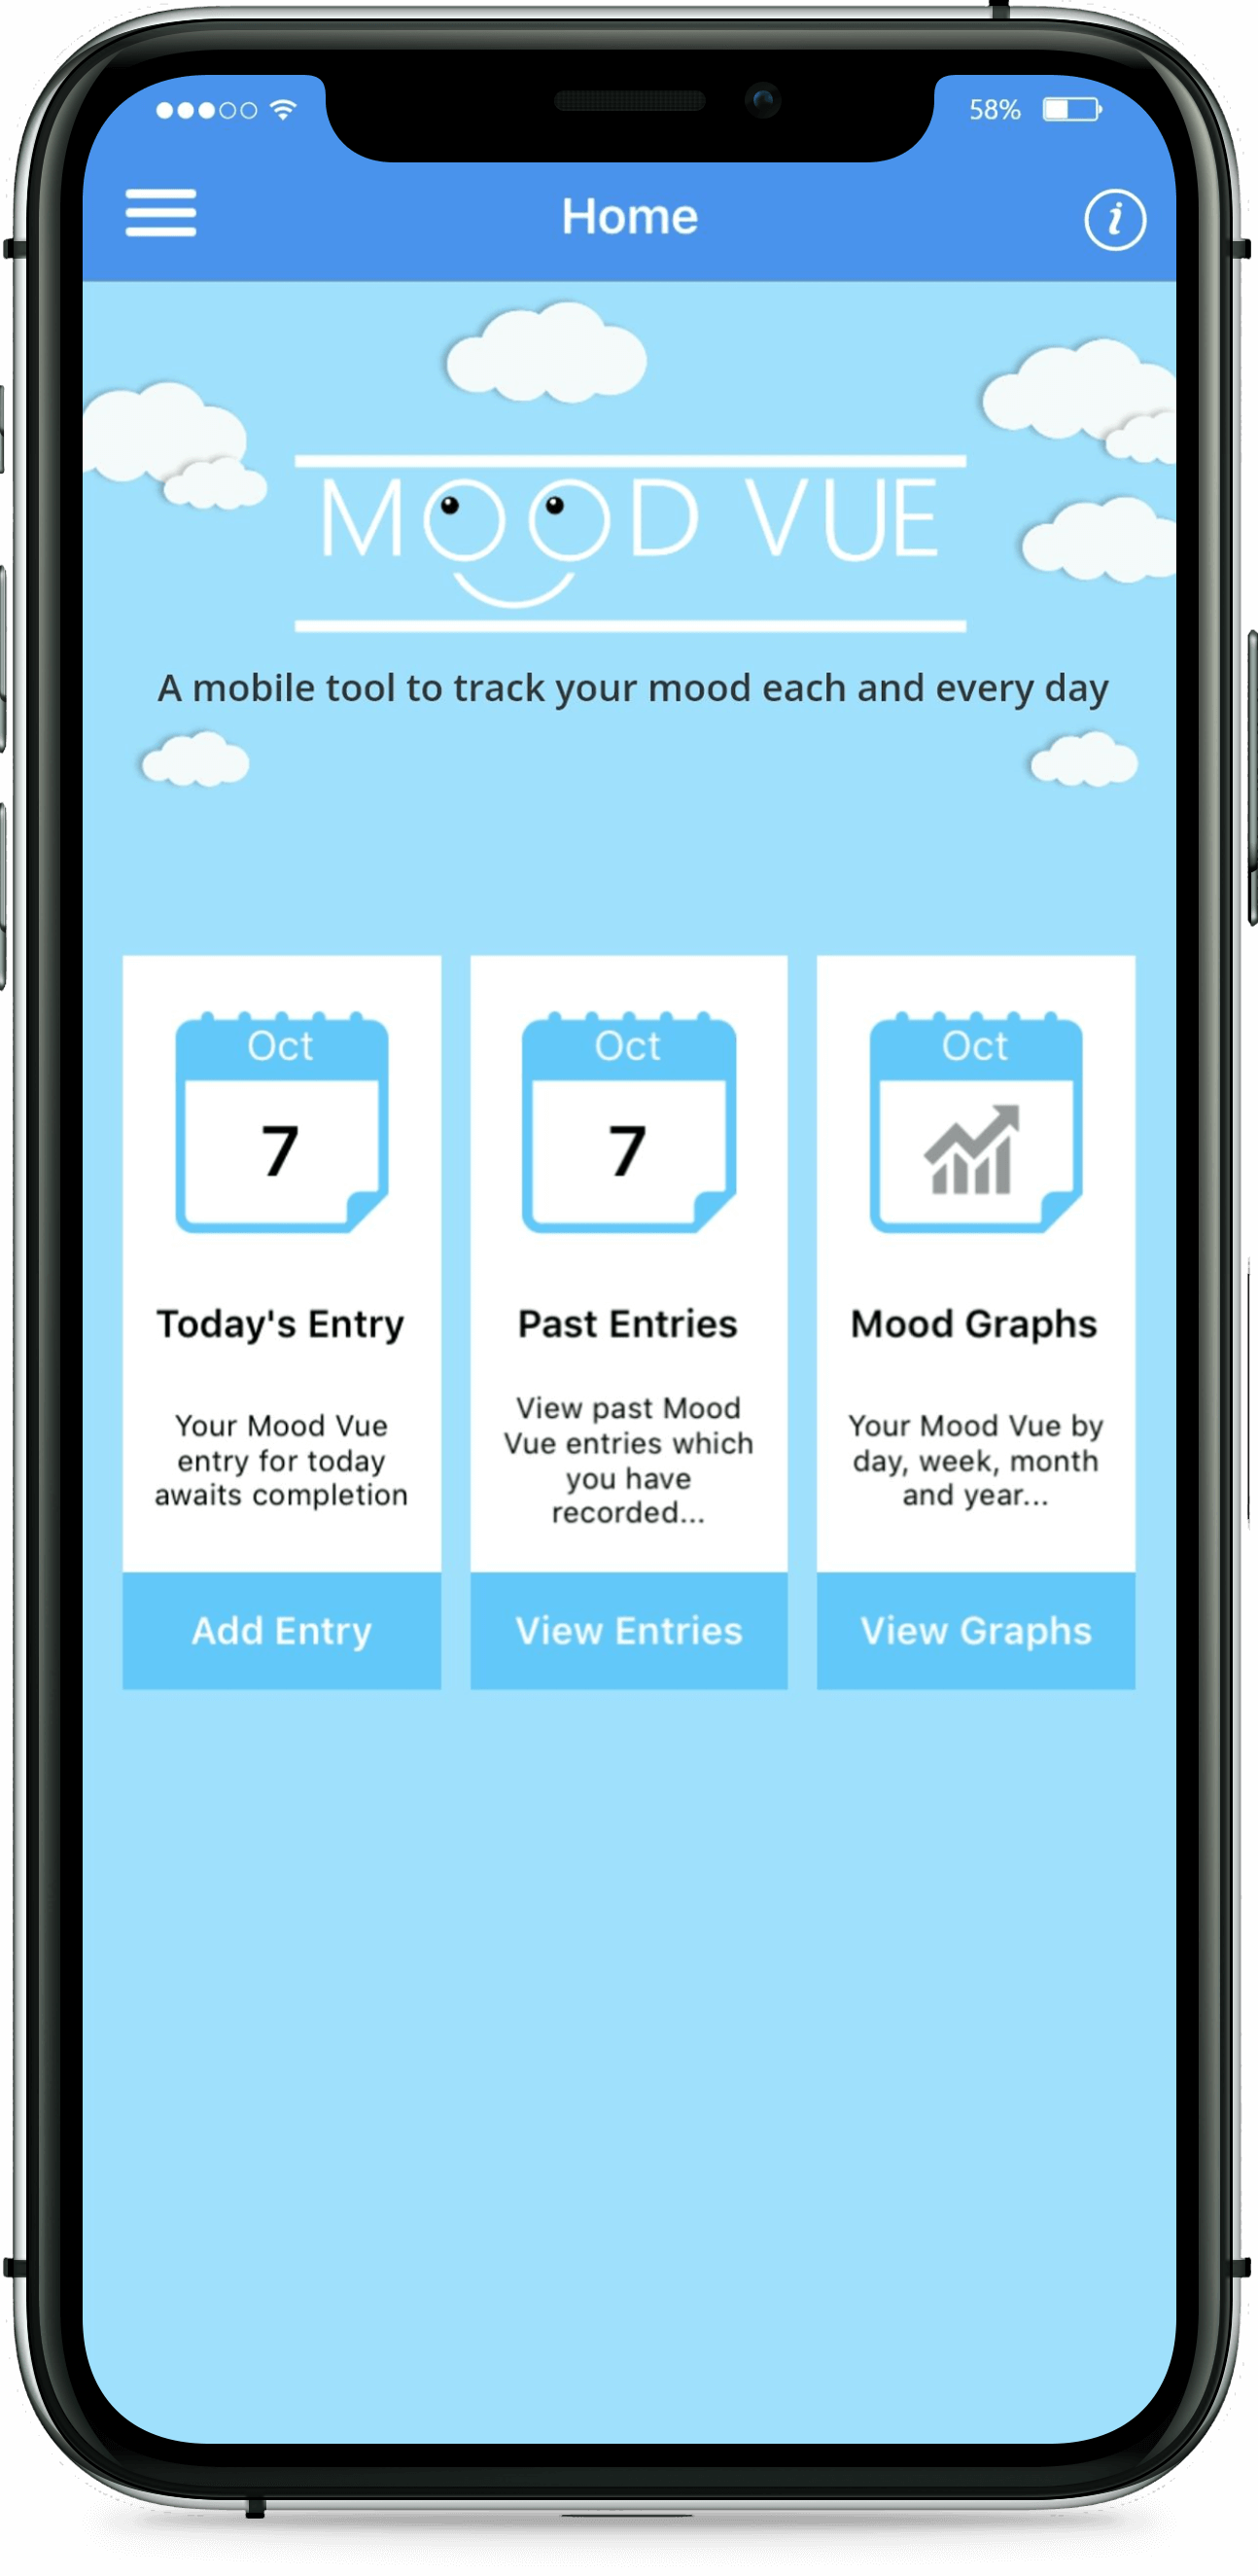 Daily mood diary app presented on an iphone